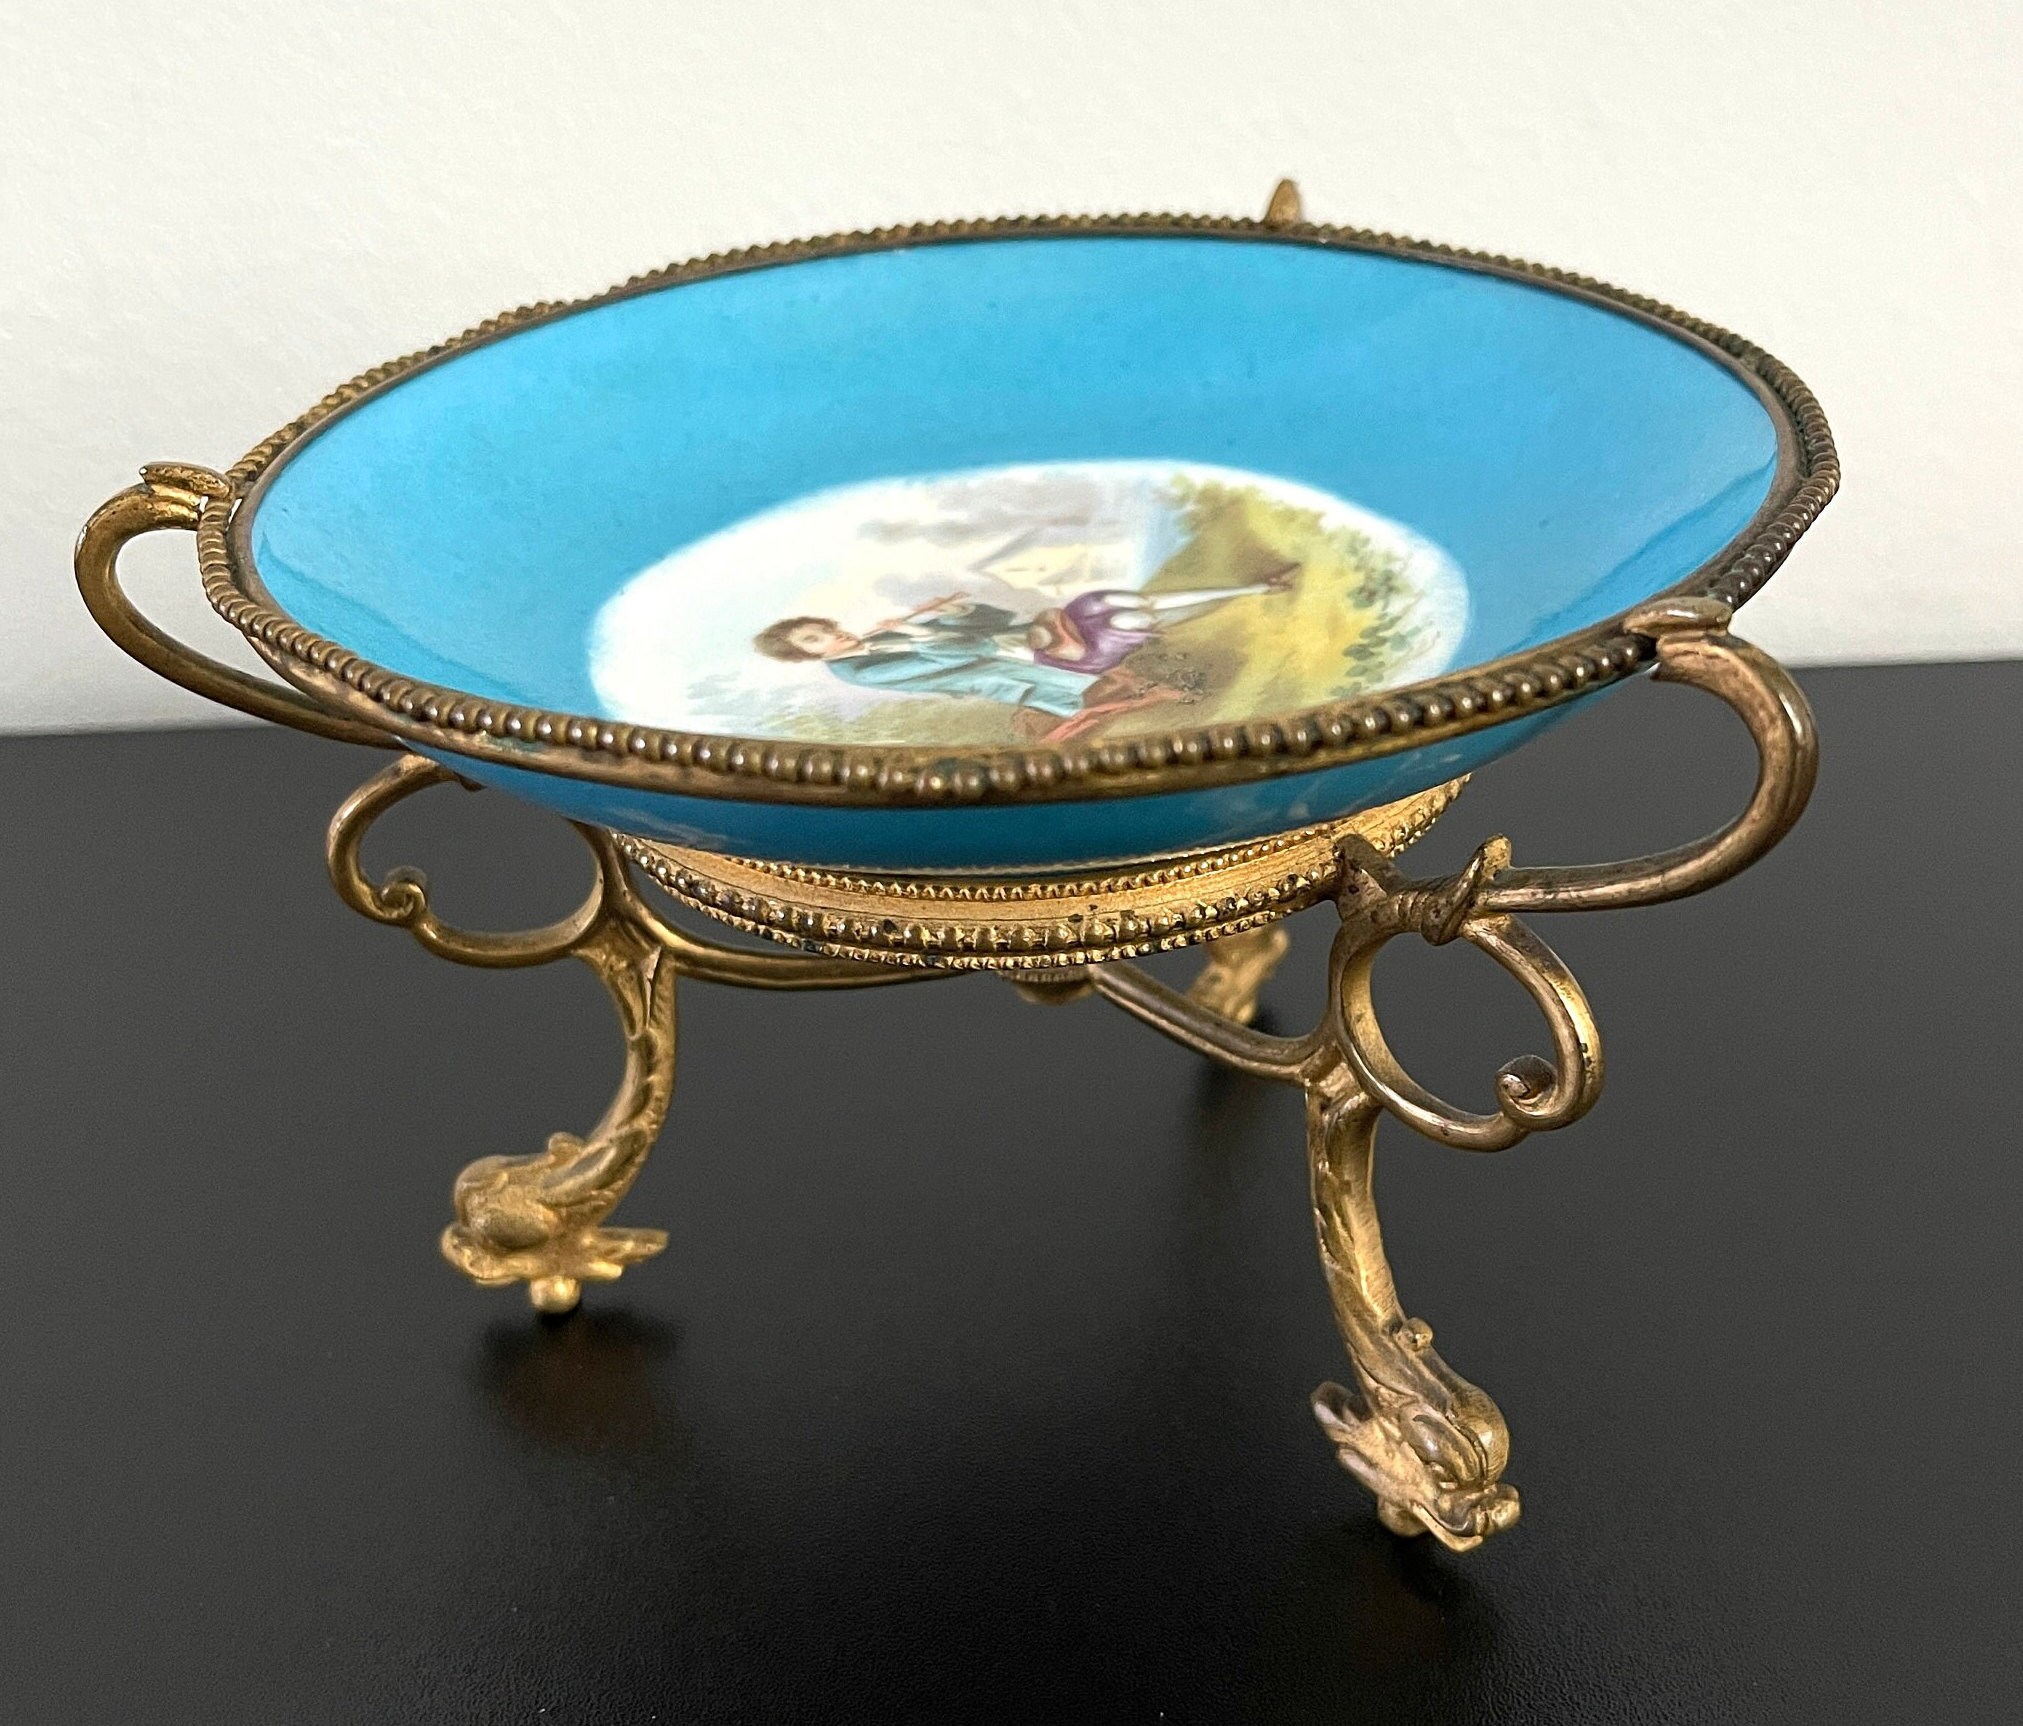 Antique French Louis XVI Japanned and Ormolu Sevres Porcelain